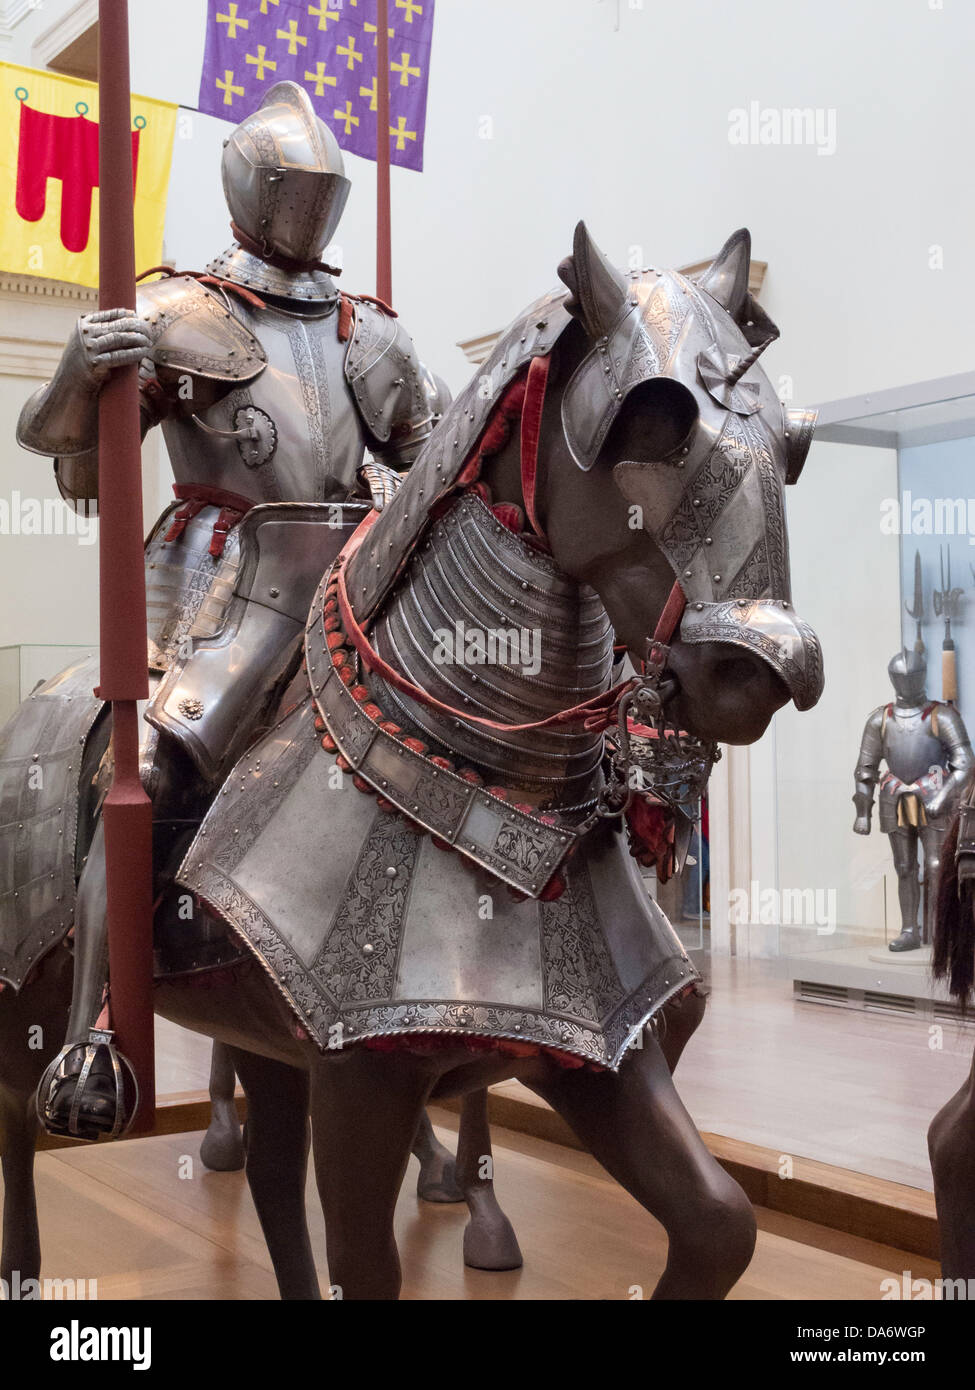 The Metropolitan Museum of Art, Equestrian Court, Arms and Armor, New York City, United States (U.S.A.) Stock Photo